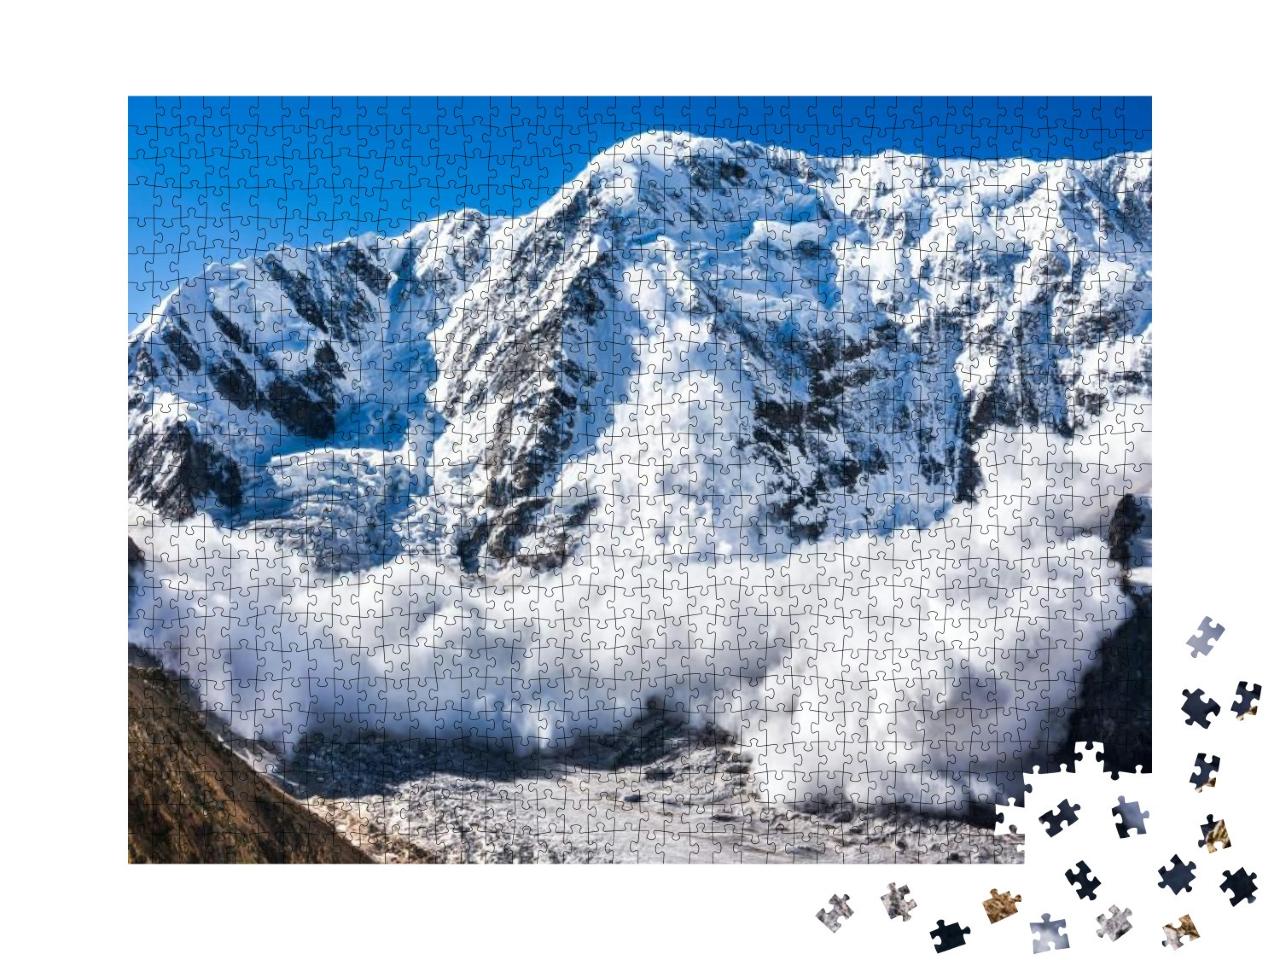 Power of Nature. Real Huge Avalanche Comes from a Big Mou... Jigsaw Puzzle with 1000 pieces